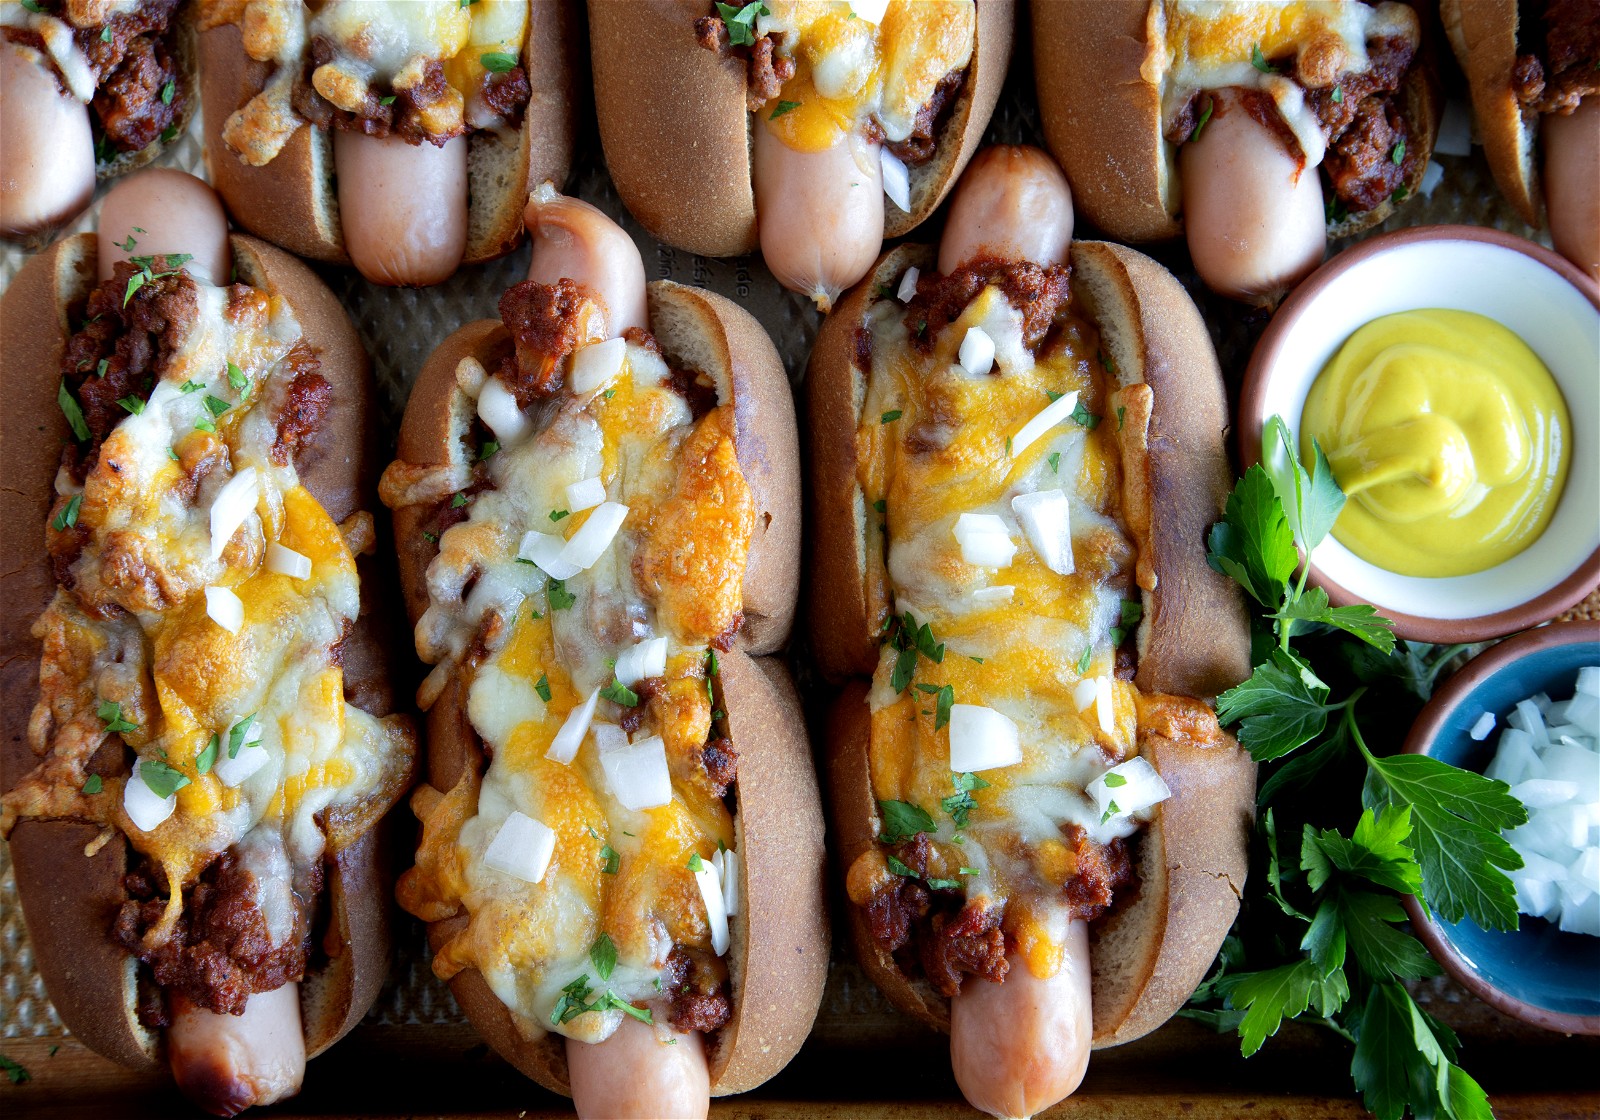 Image of Java Chili Cheese Hot Dogs